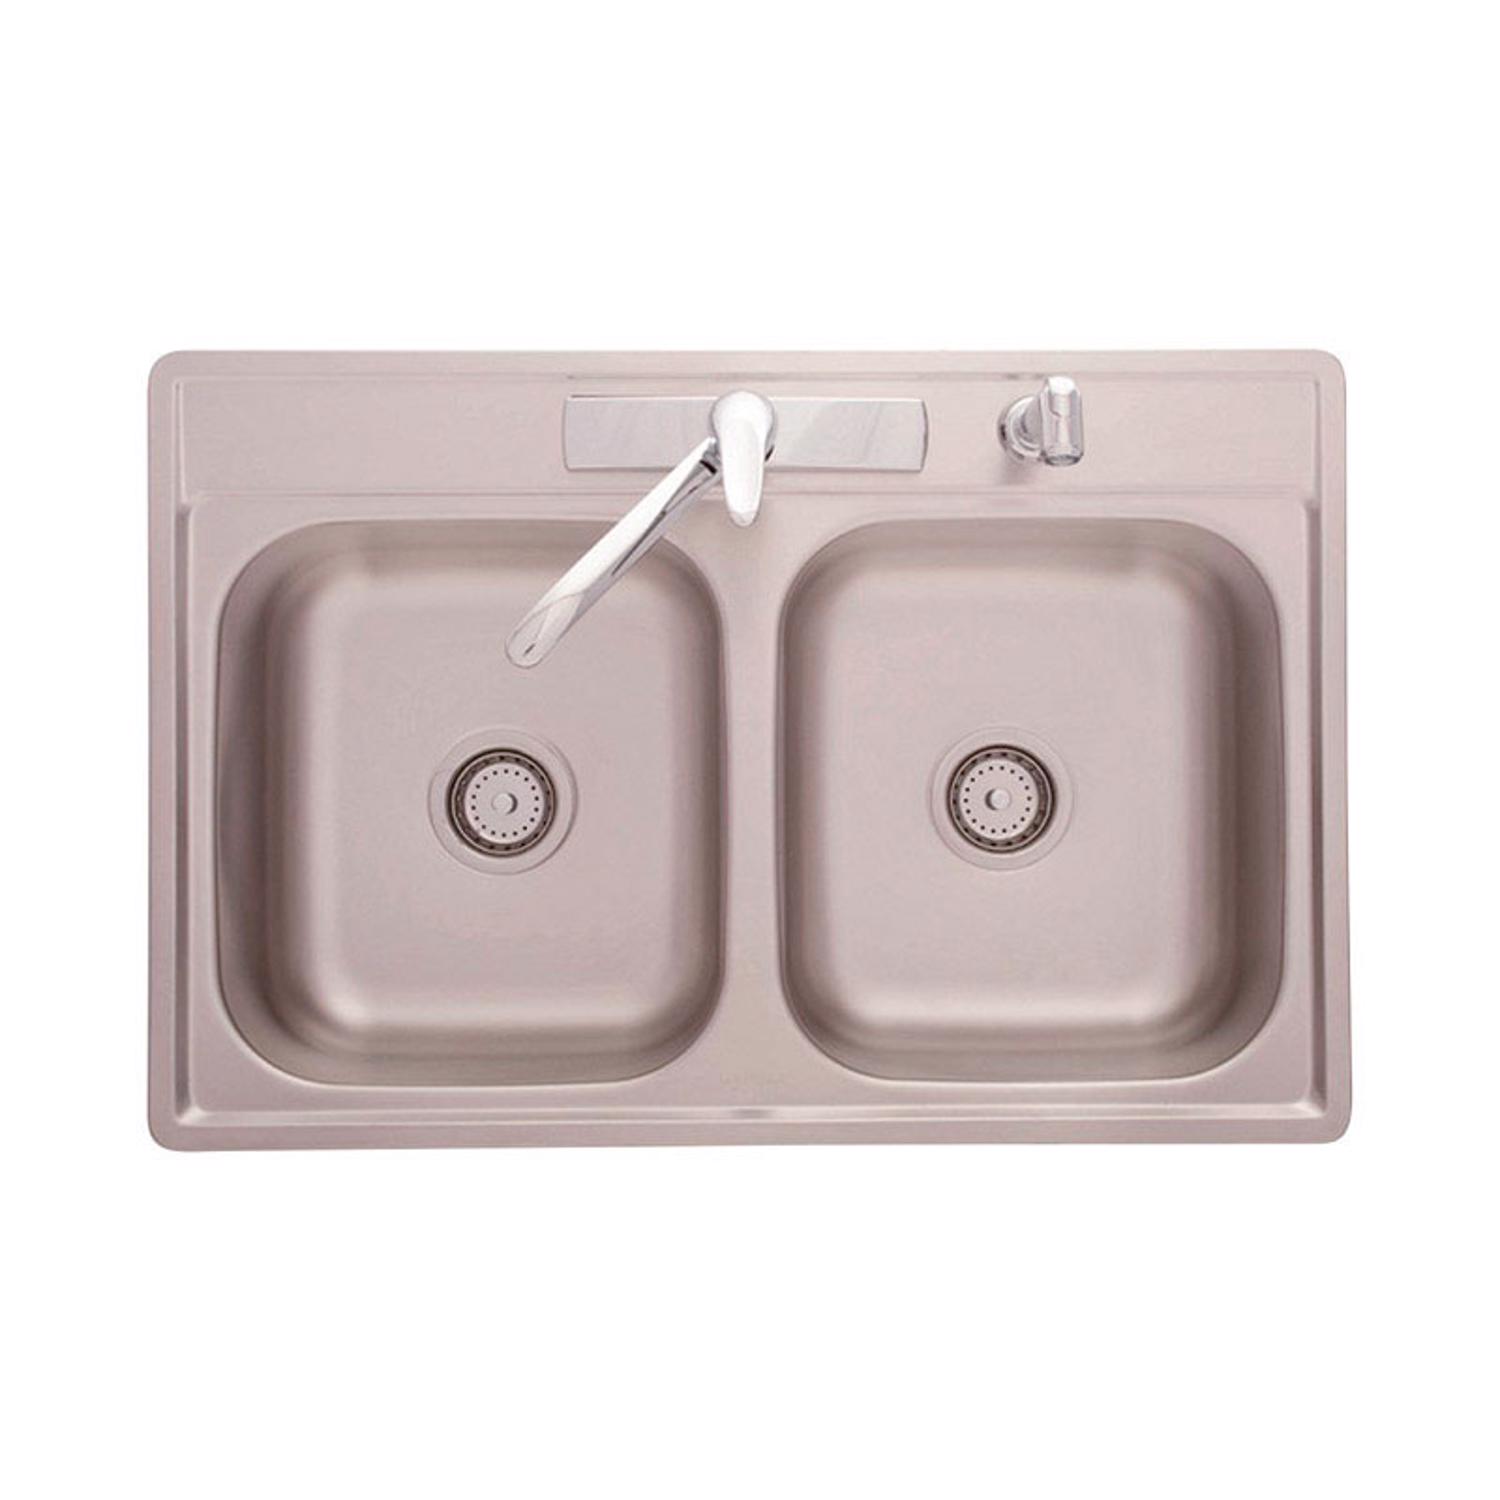 Photos - Kitchen Sink Franke Kindred Creemore Stainless Steel Top Mount 33 in. W X 22 in. L Double Bowl 